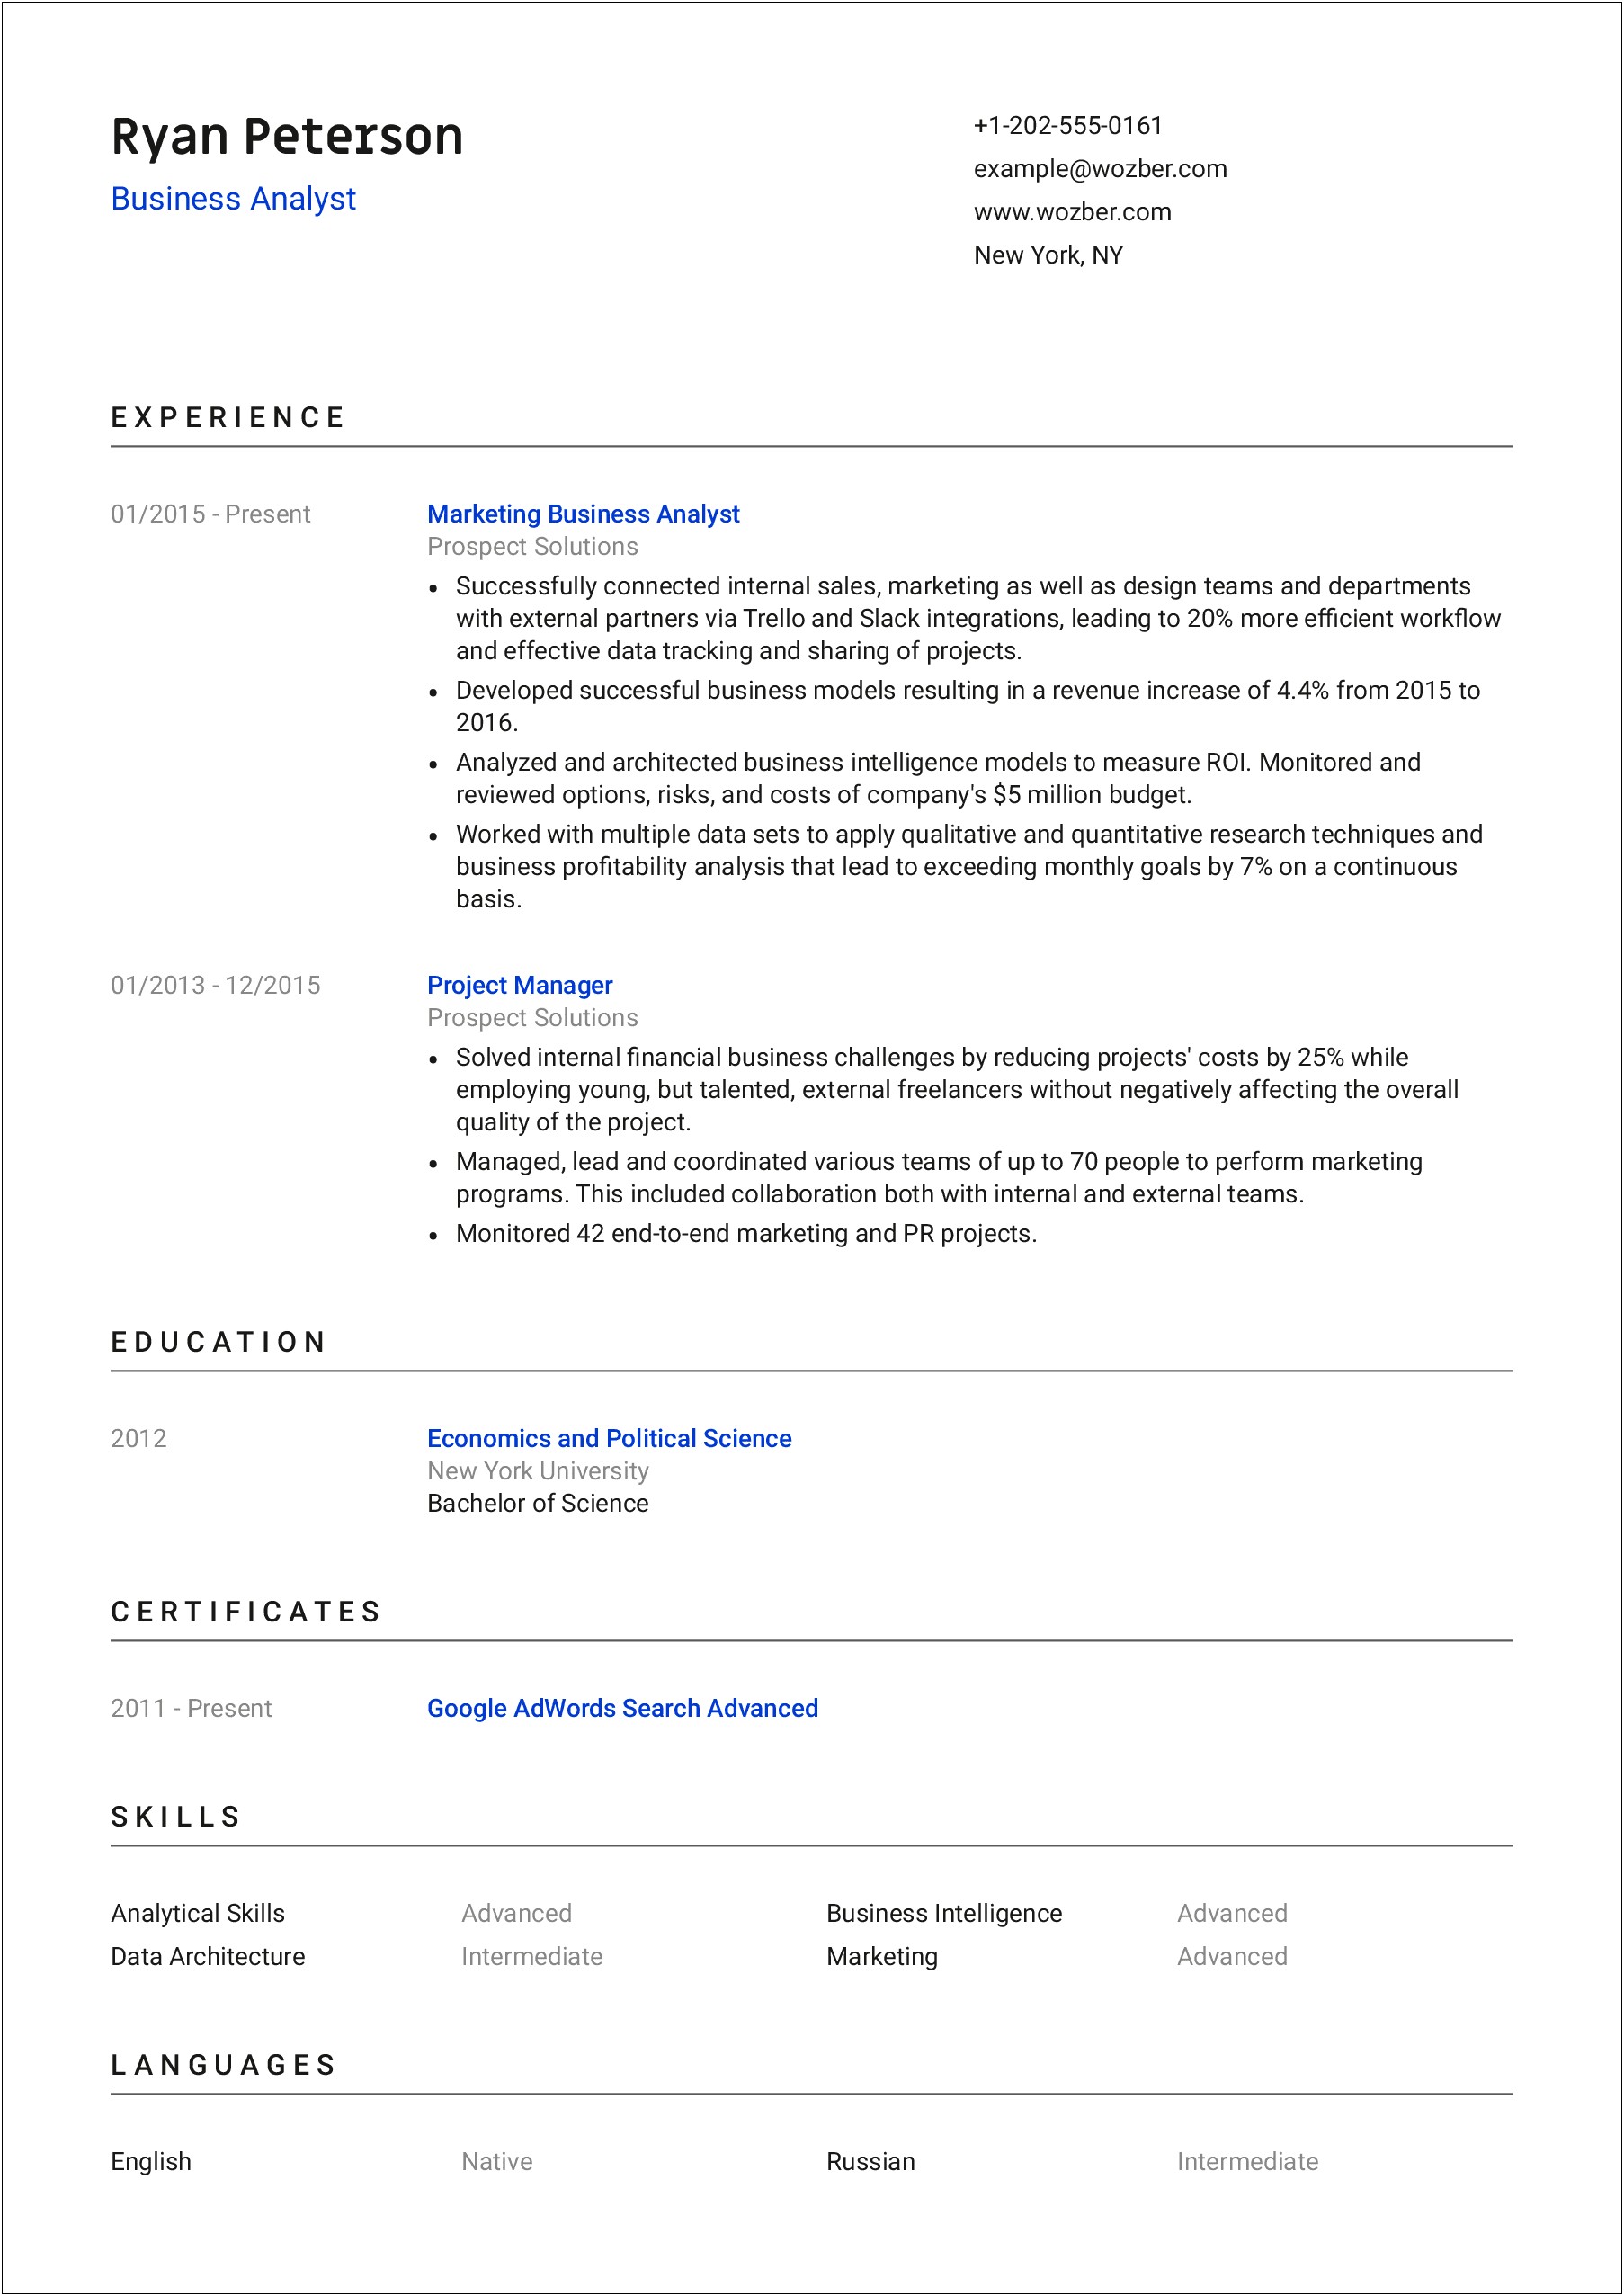 Resume Template For Lack Of Experience